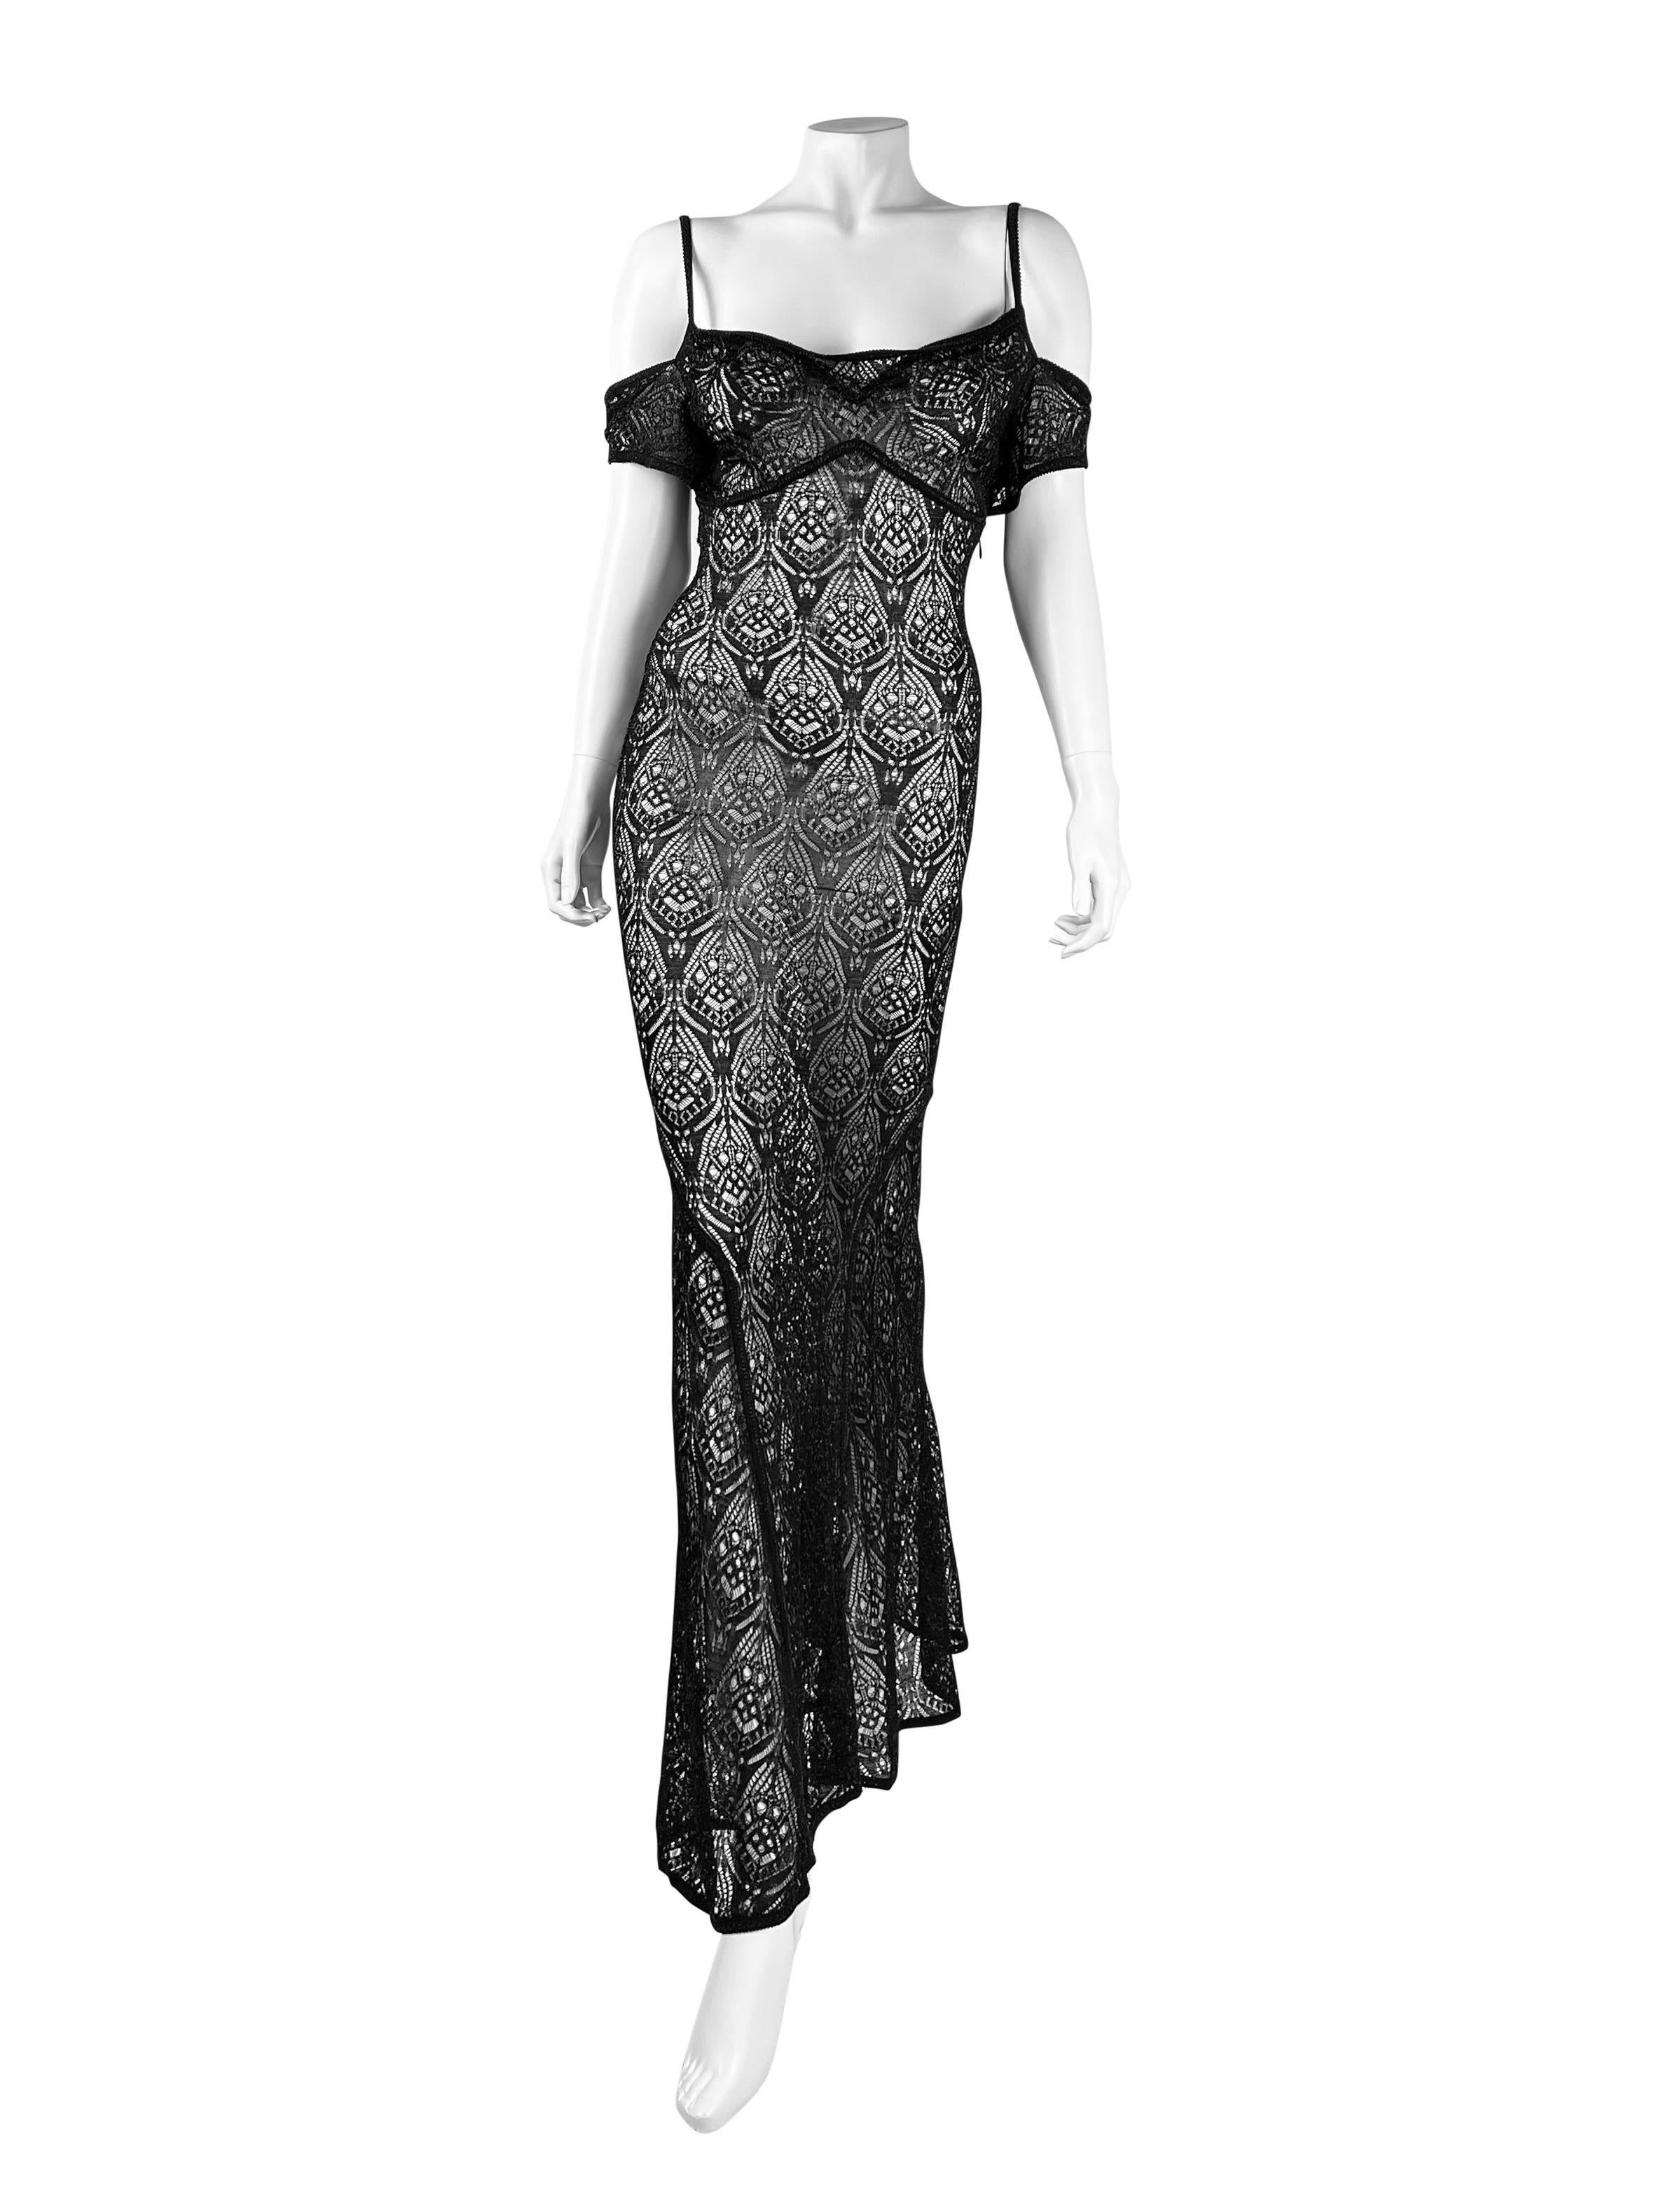 A stunning crocheted gown with beautiful silver lurex sparkle and the most flattering detailing.

Two details on the side allo various styling options.

Please be advised that the dress is not lined and is fully transparent.

Size S, with 95%